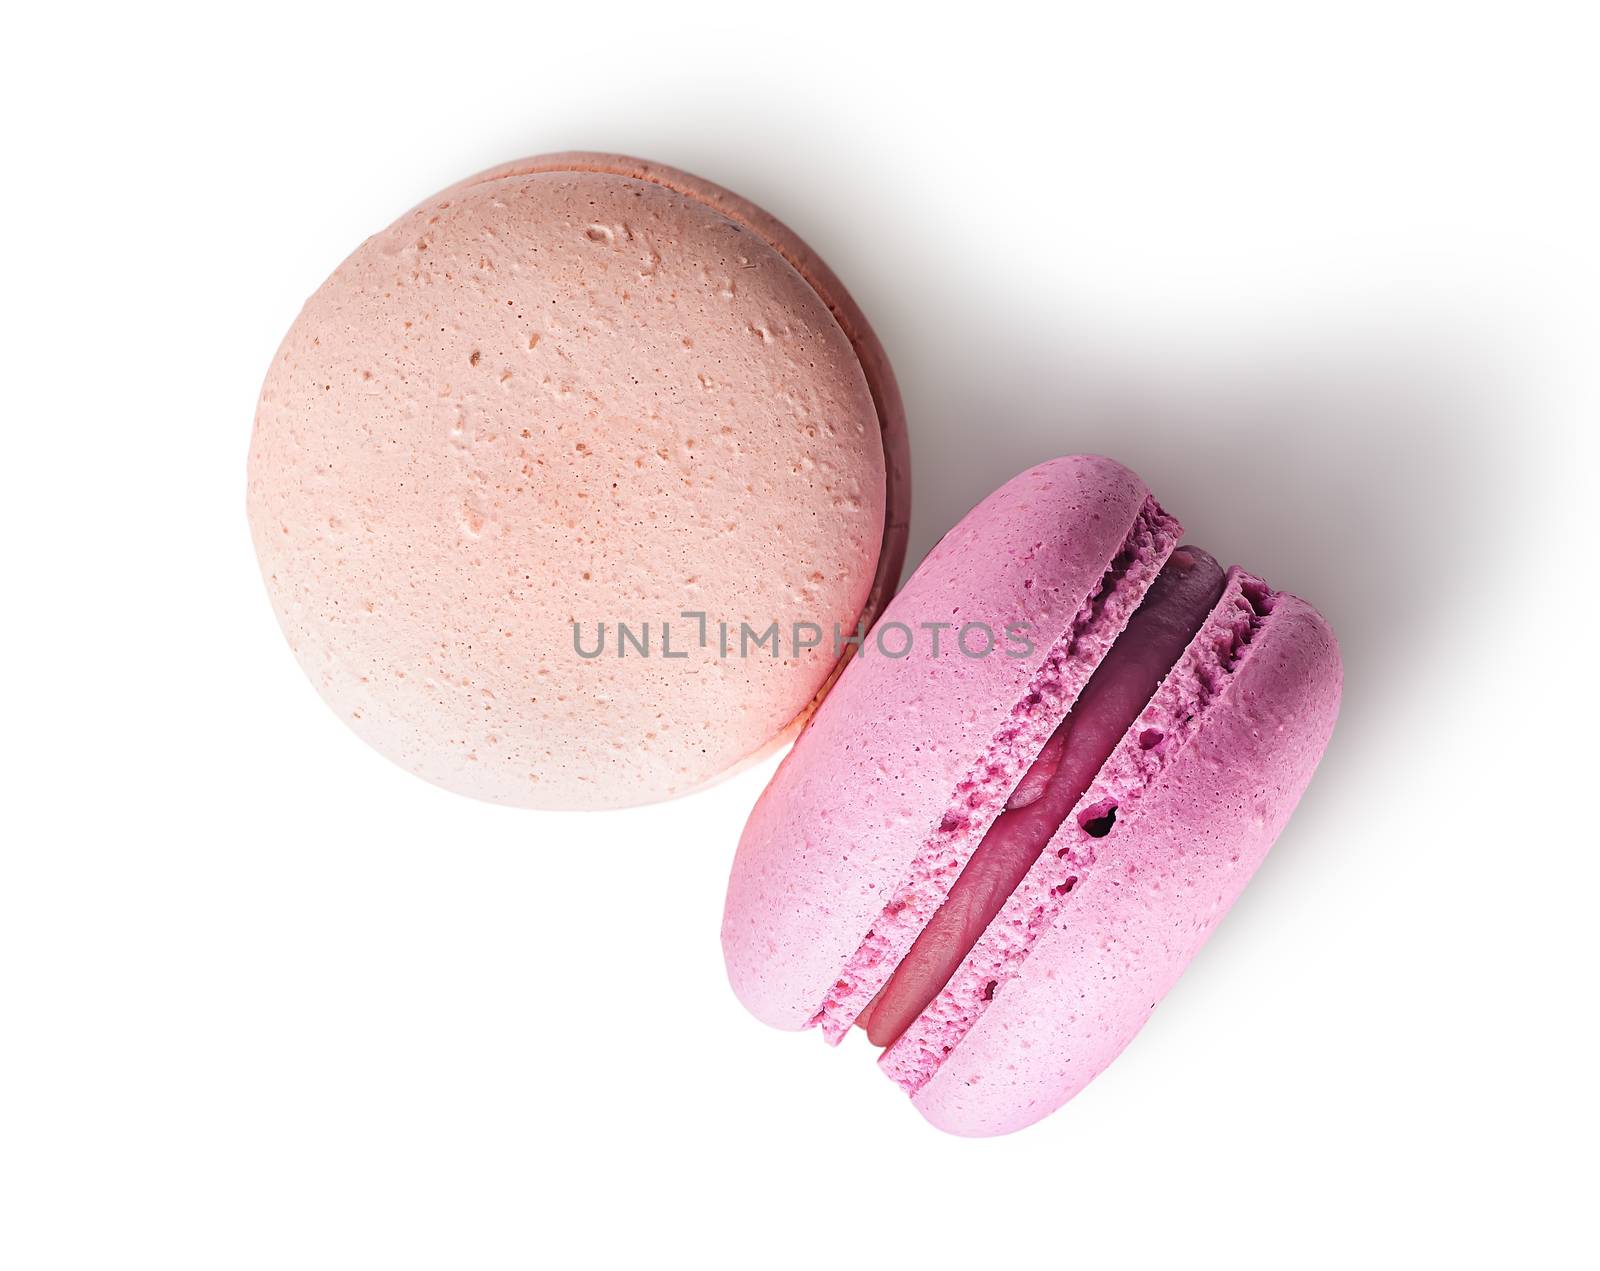 Two macaroon beige pink top view on white background